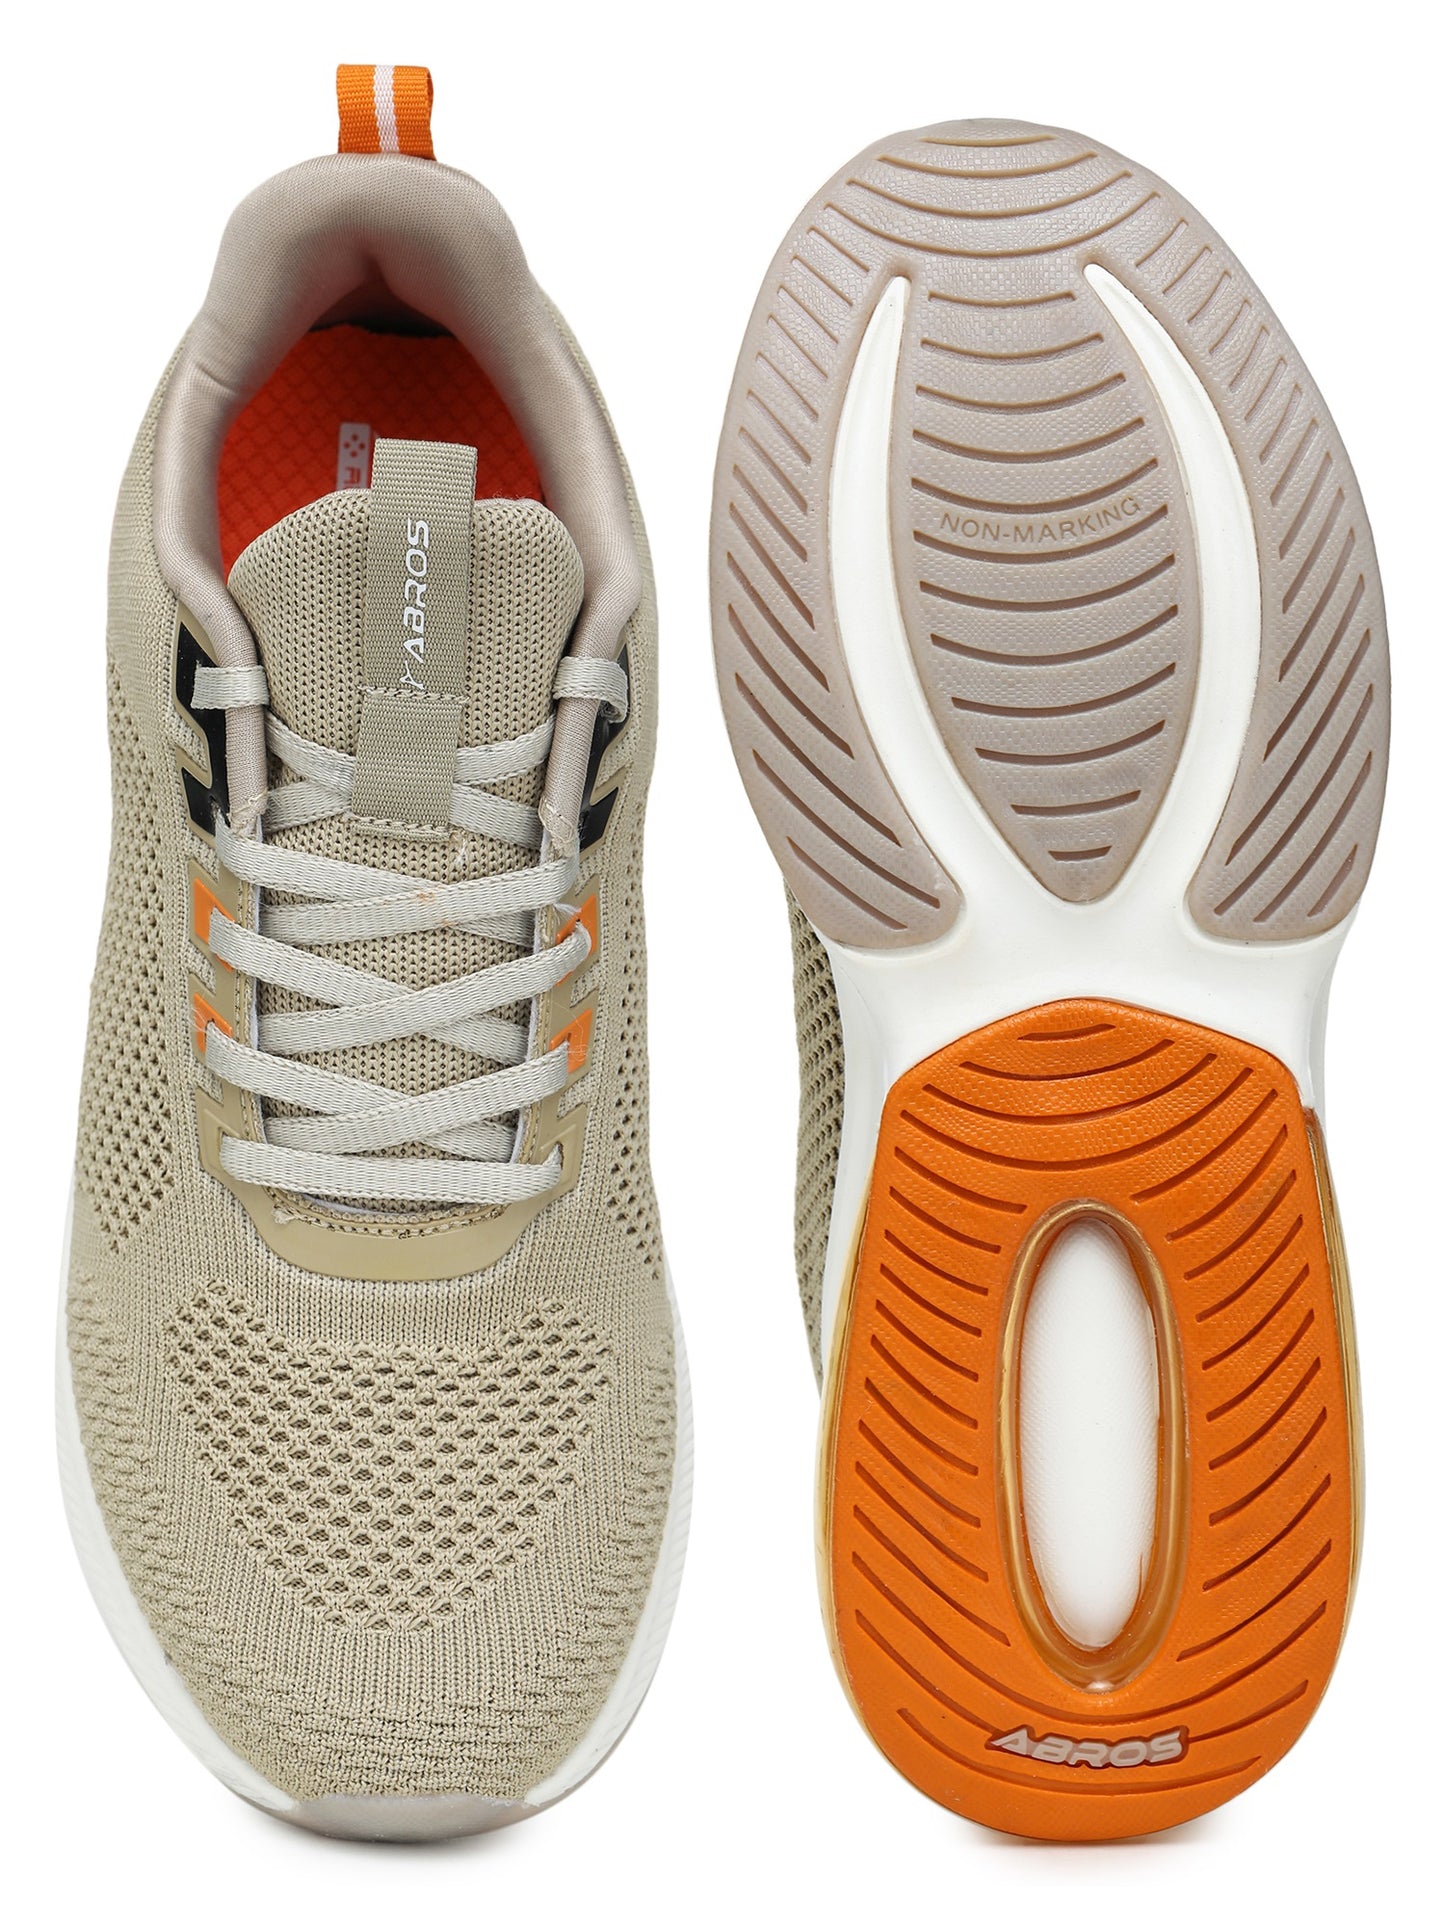 ABROS TYRONE-O SPORT-SHOES For MEN'S